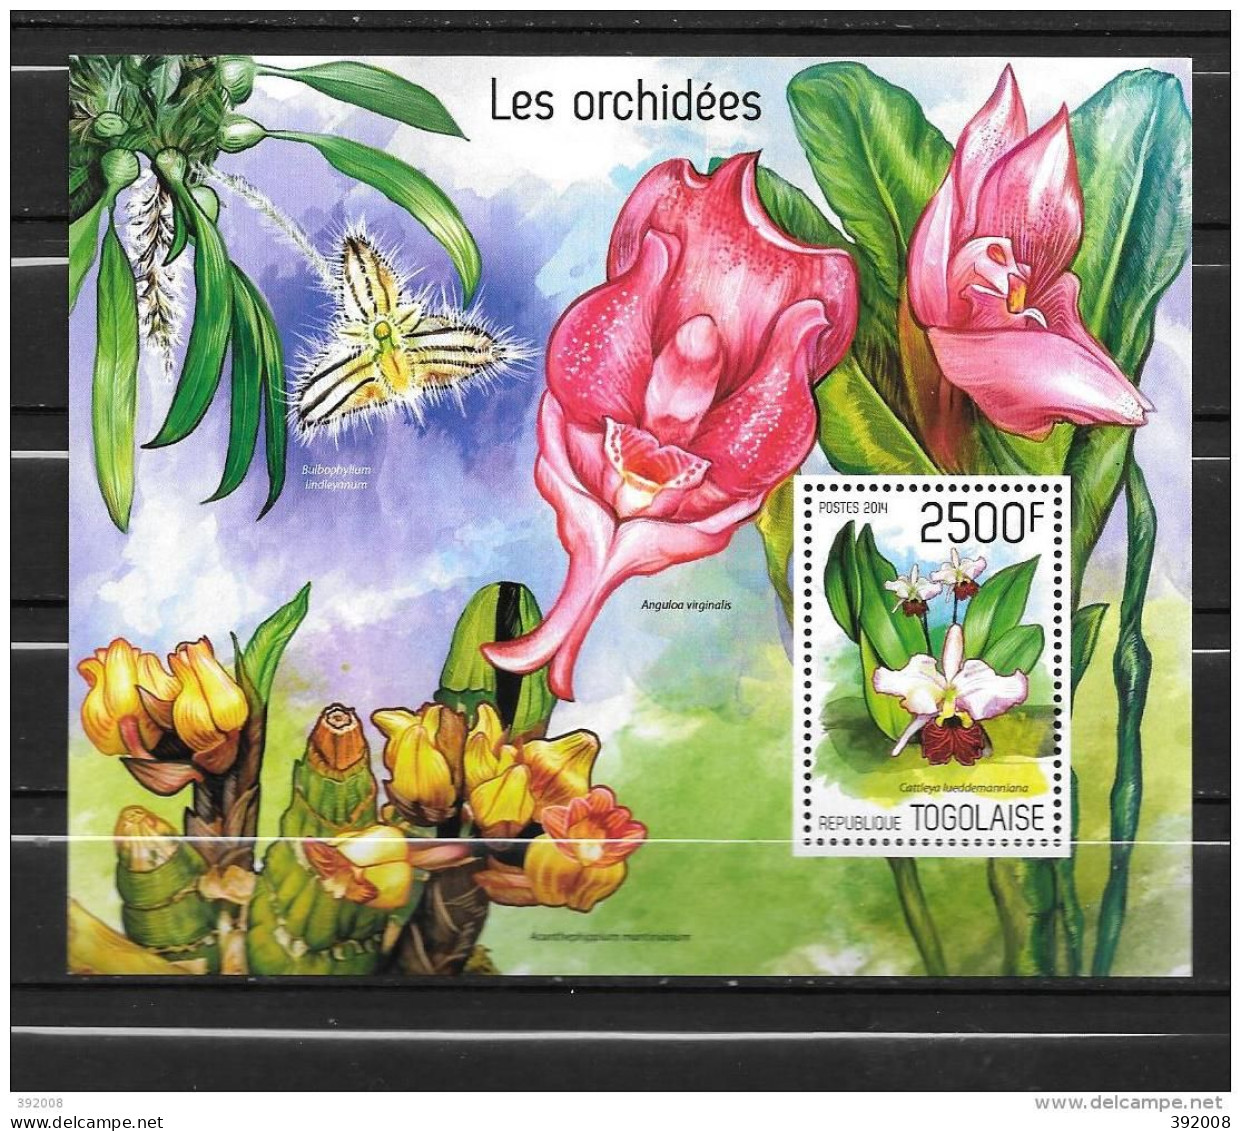 19 - TOGO - BF 832**MNH - Orchids